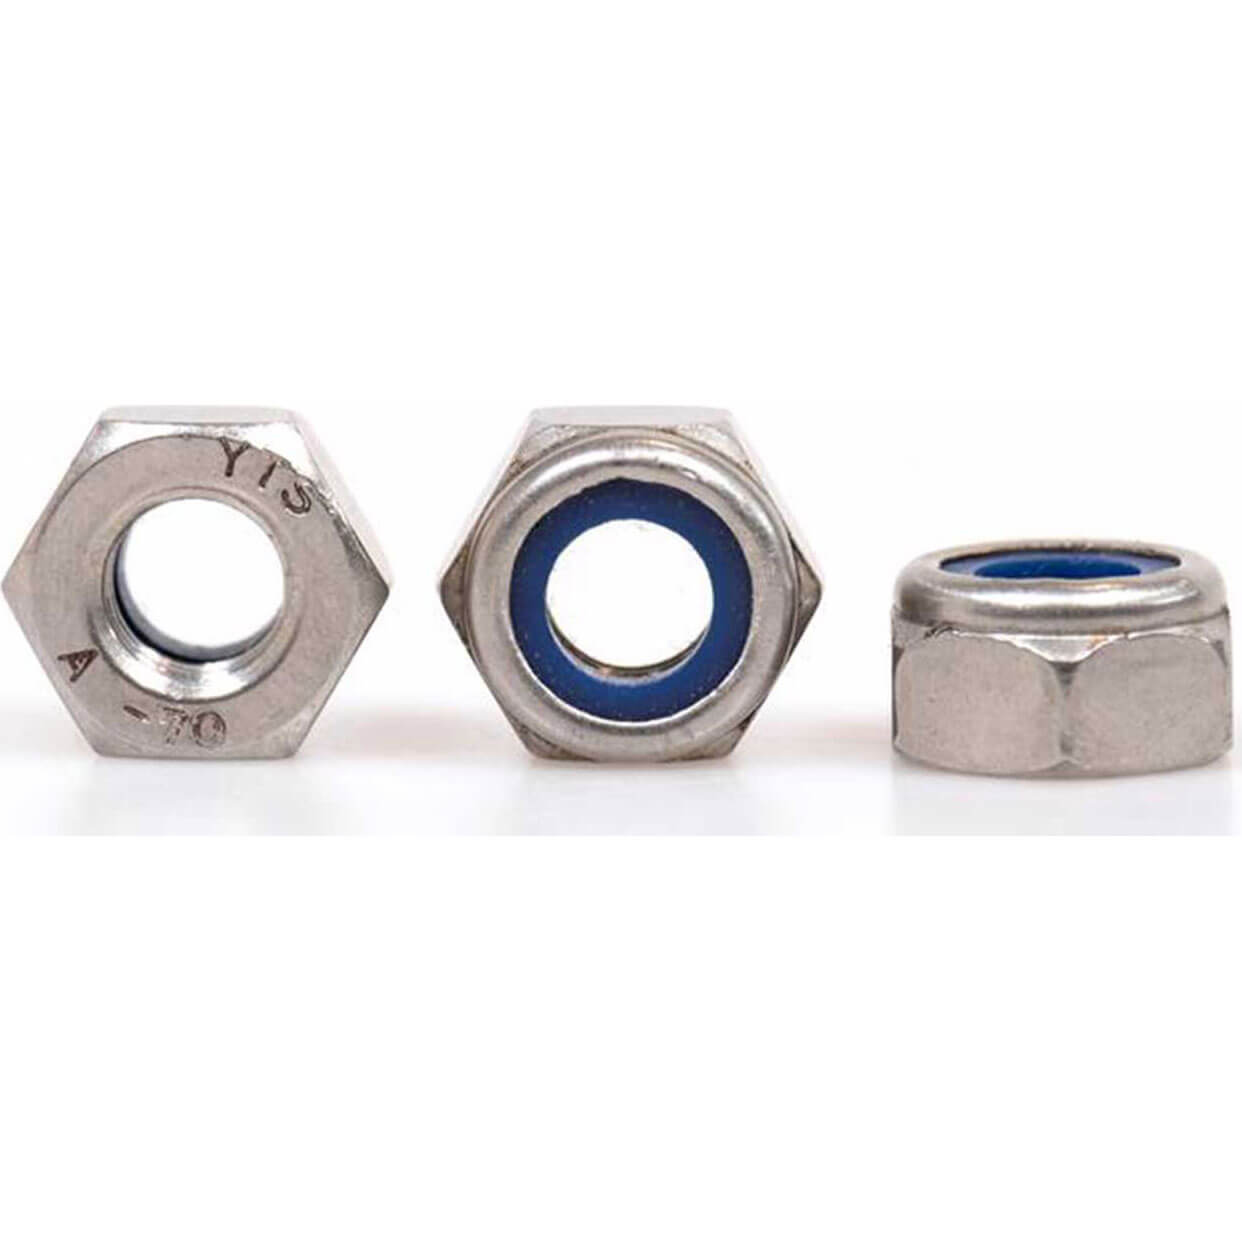 Image of Sirius A4 316 Stainless Steel Nyloc Nuts M4